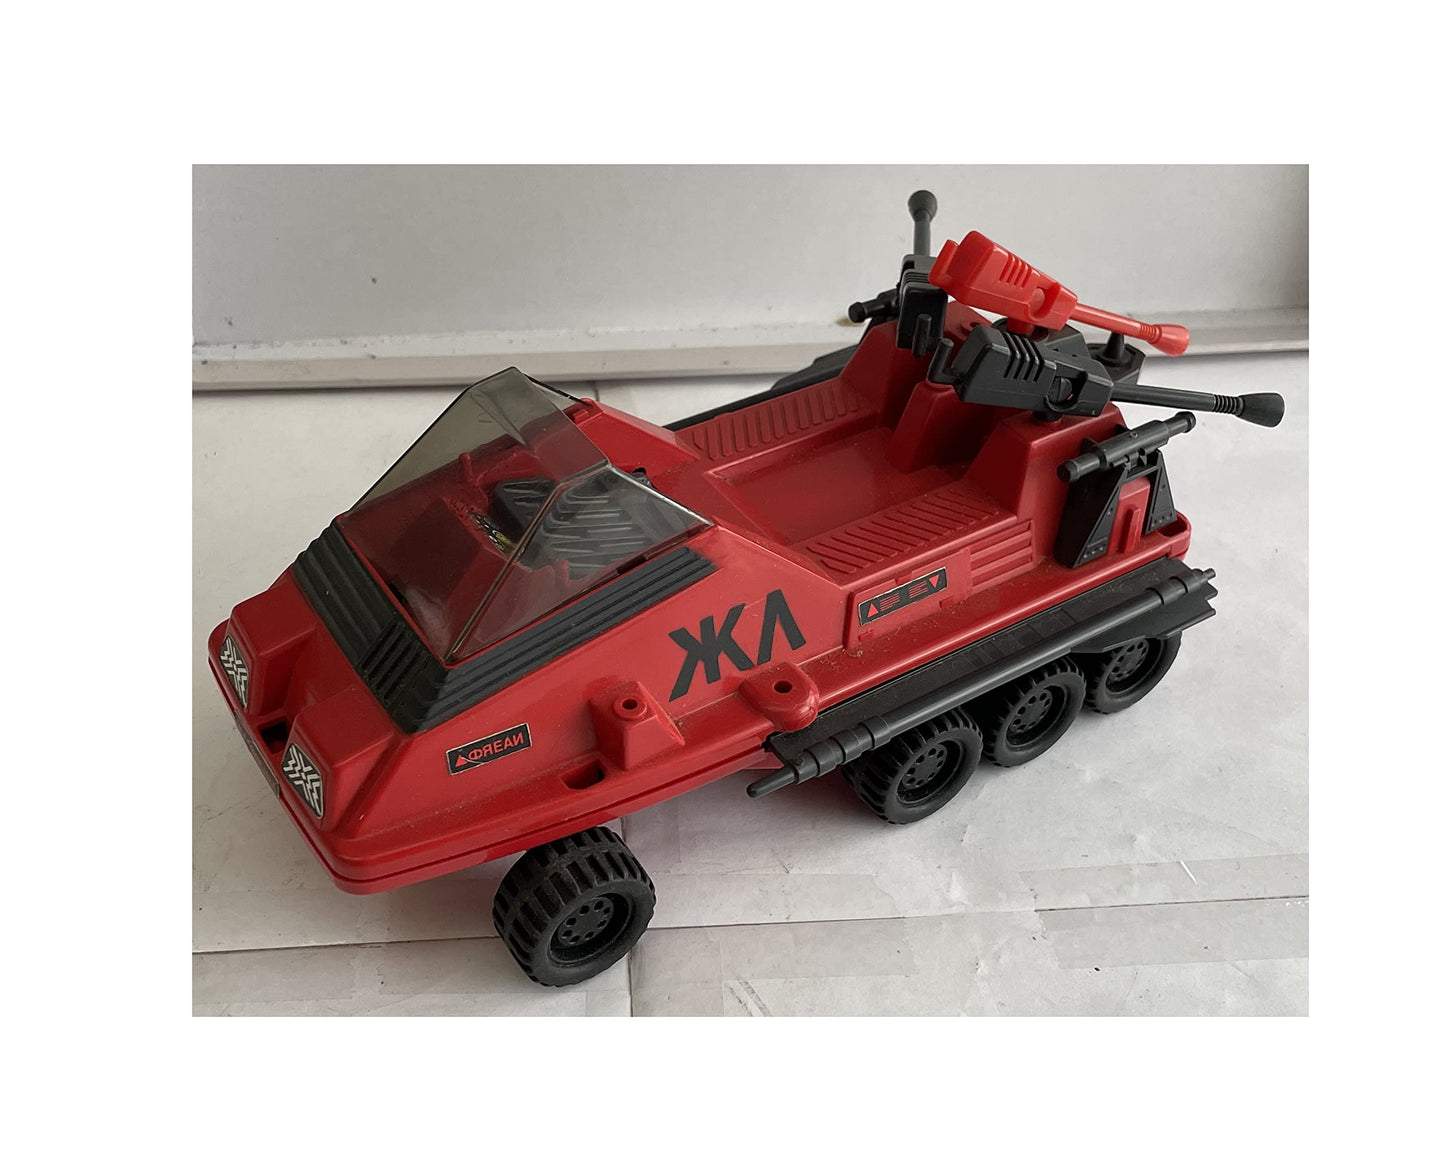 Vintage Action Man Action Force Shadowtrak Action Vehicle - Fantastic Condition